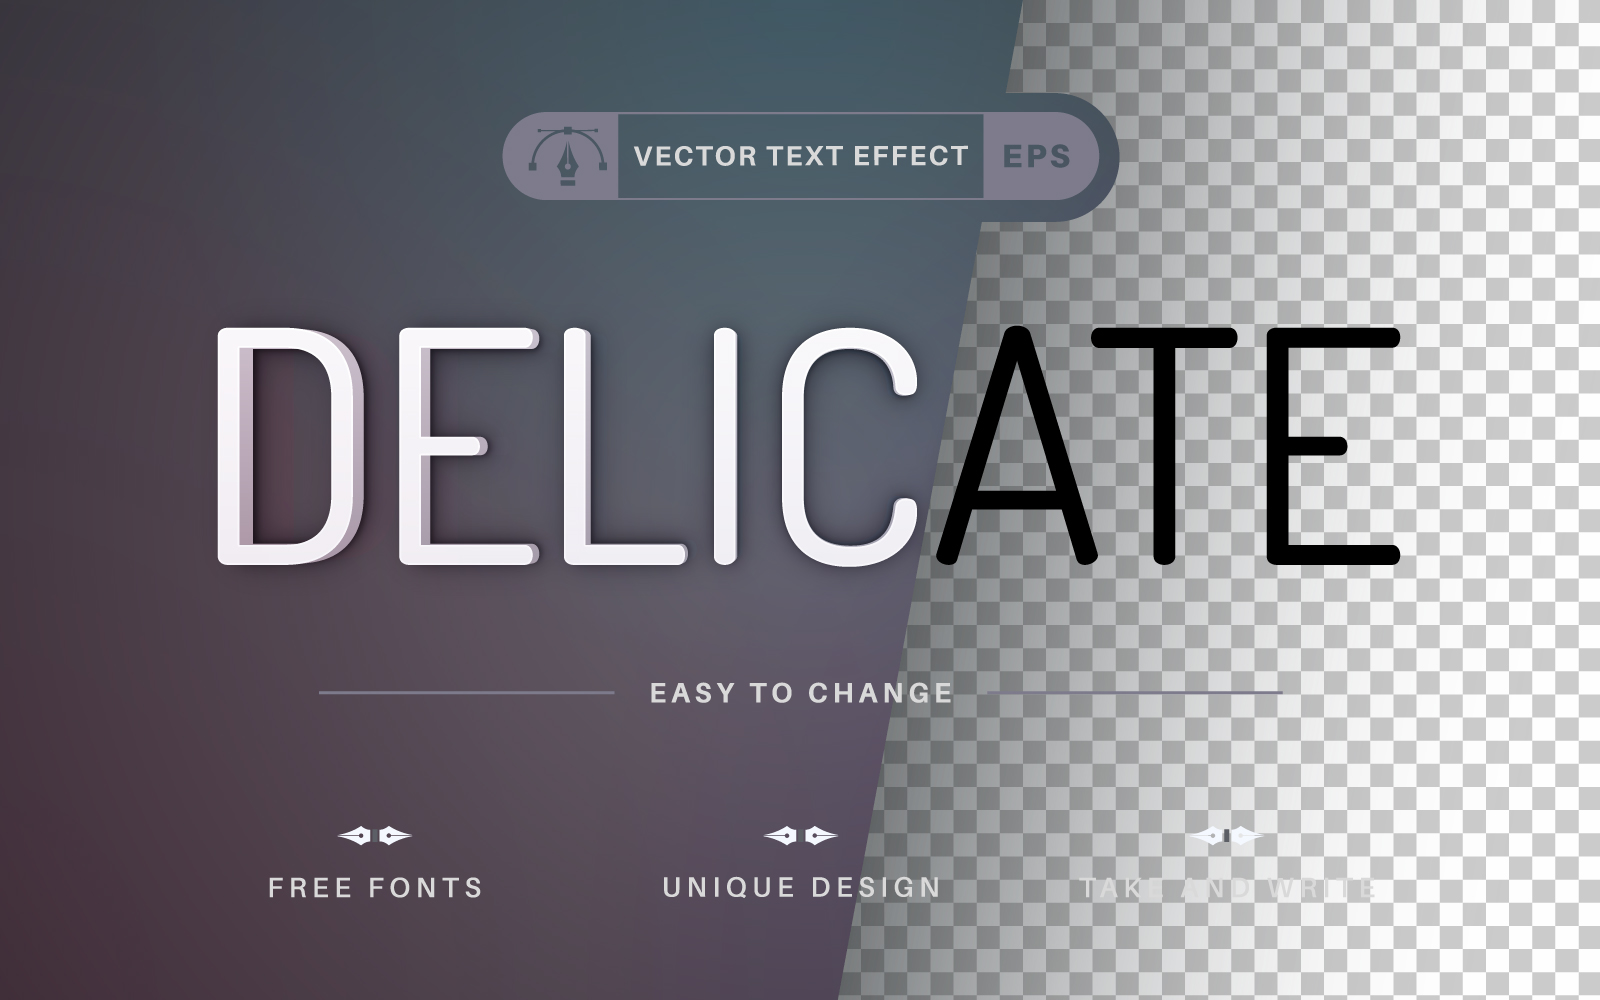 Delicate - Editable Text Effect, Font Style